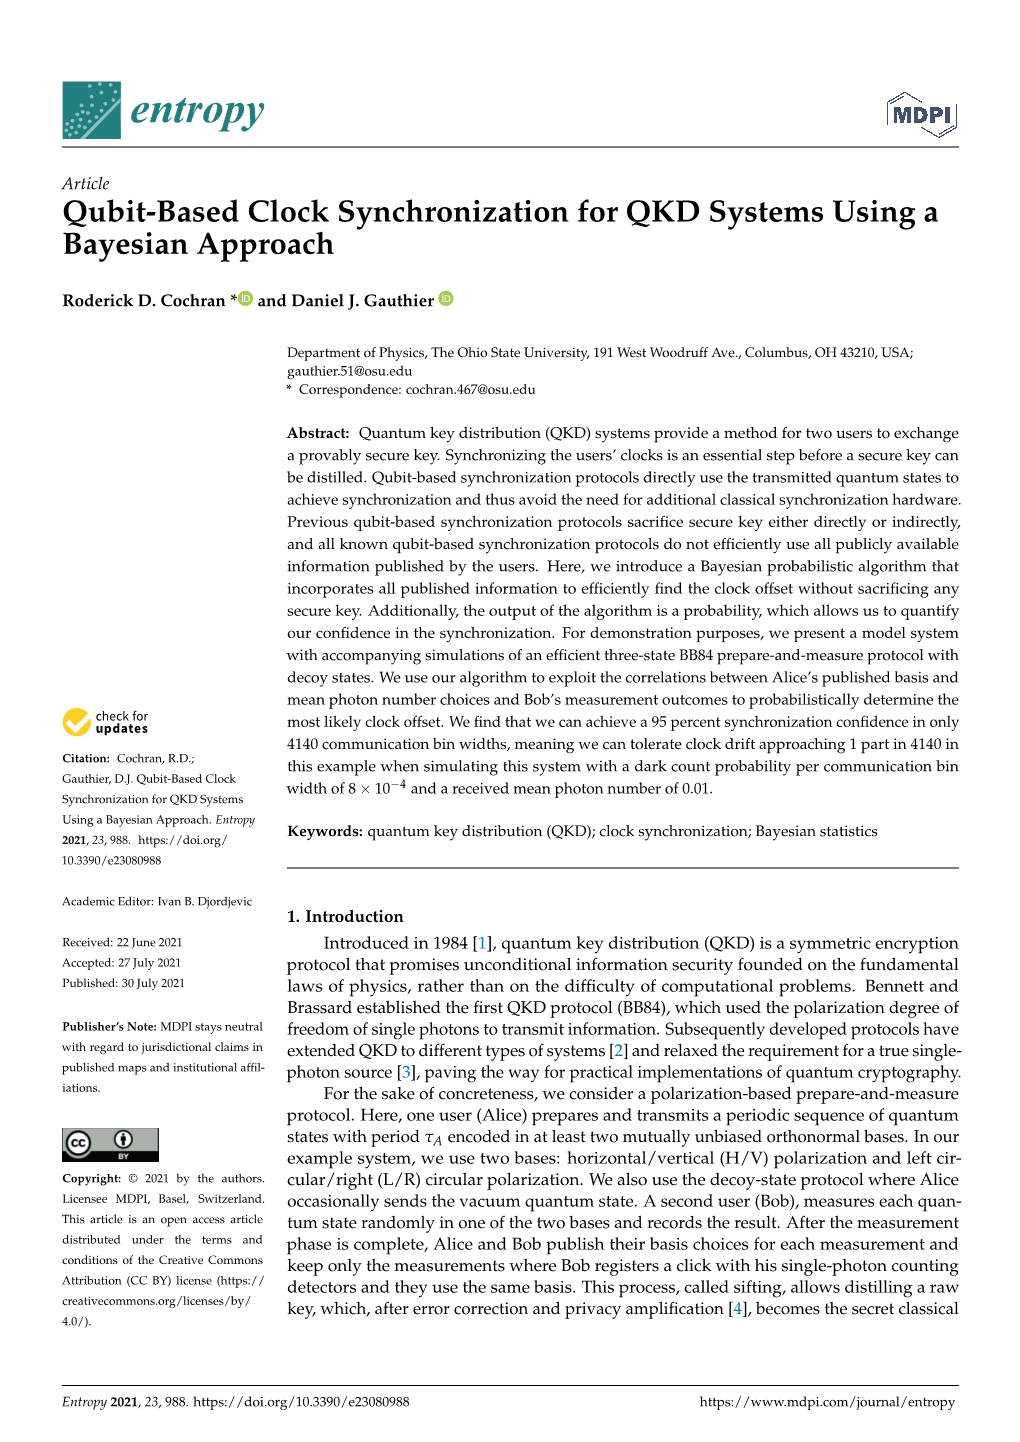 Qubit-Based Clock Synchronization for QKD Systems Using a Bayesian Approach